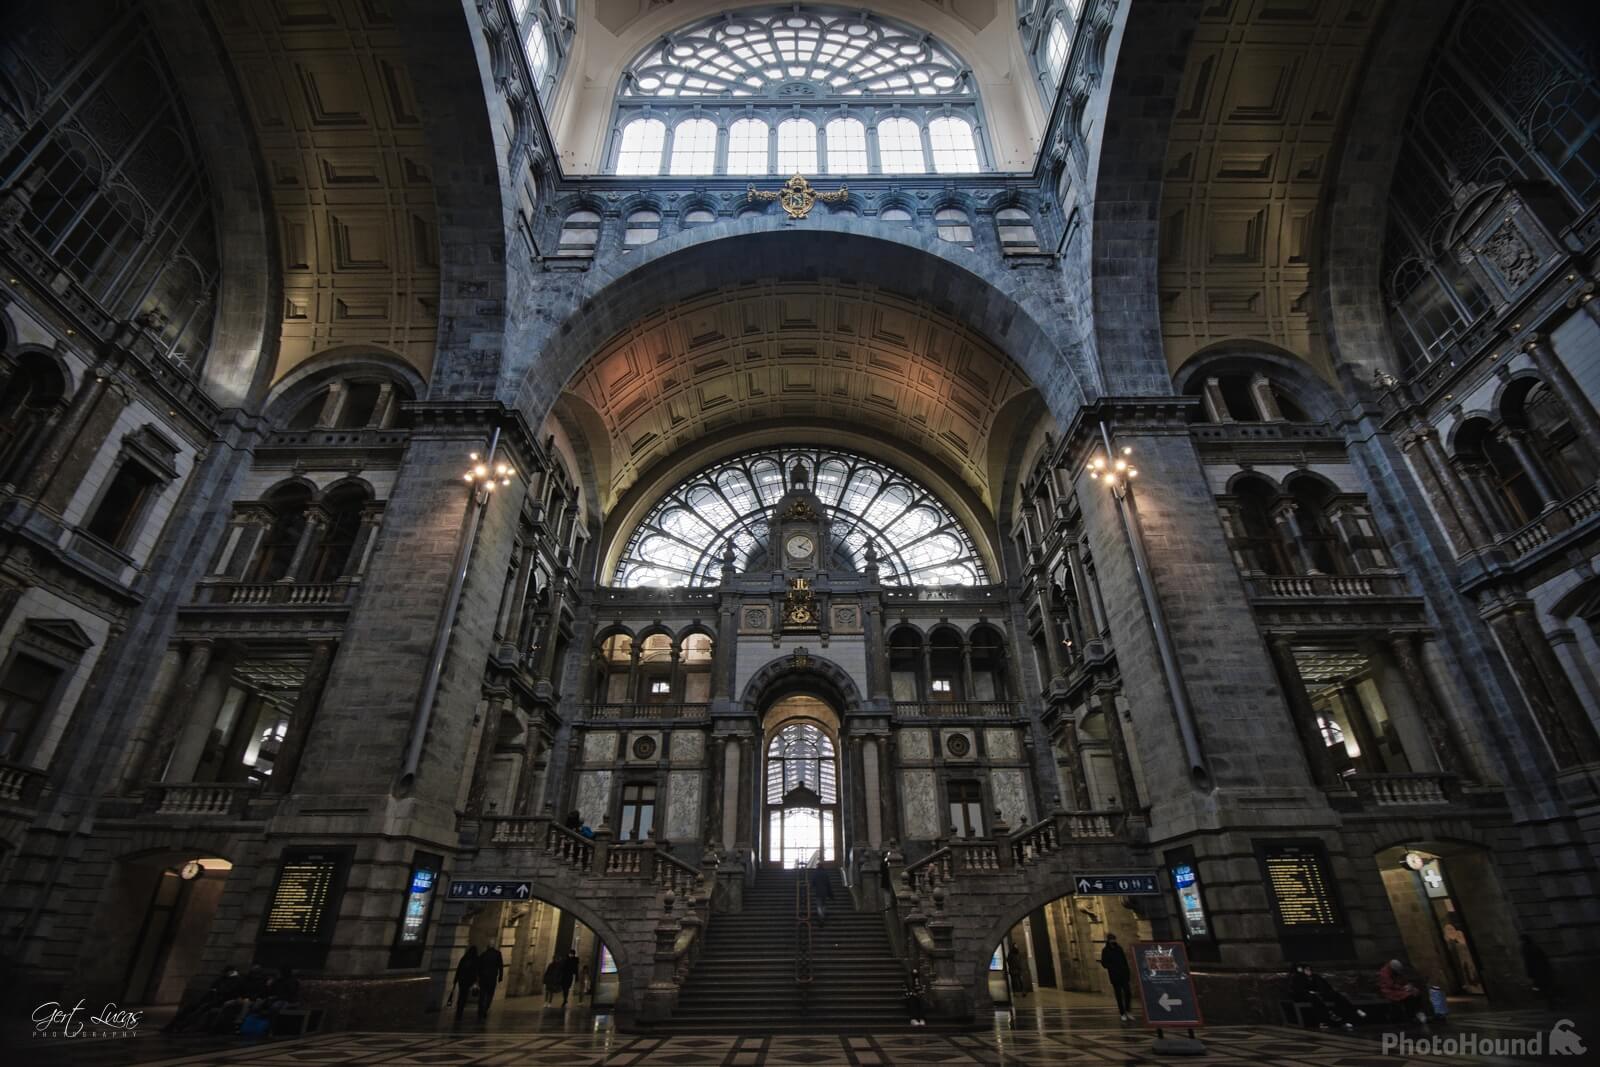 Image of Antwerpen Centraal Train Station - Main Lobby by Gert Lucas